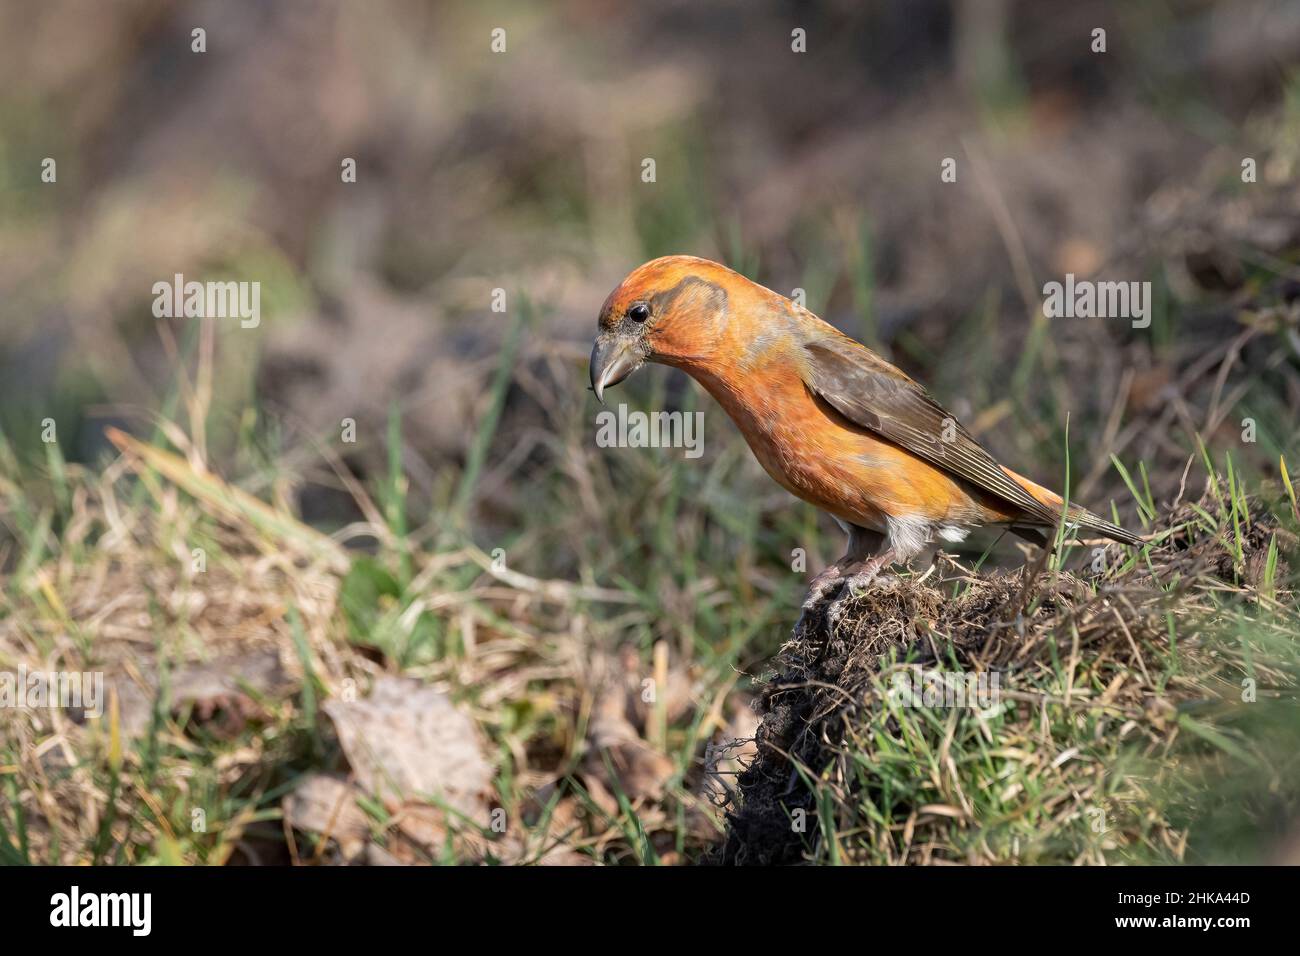 Crossbill Drinking From Pool of Water Stock Photo